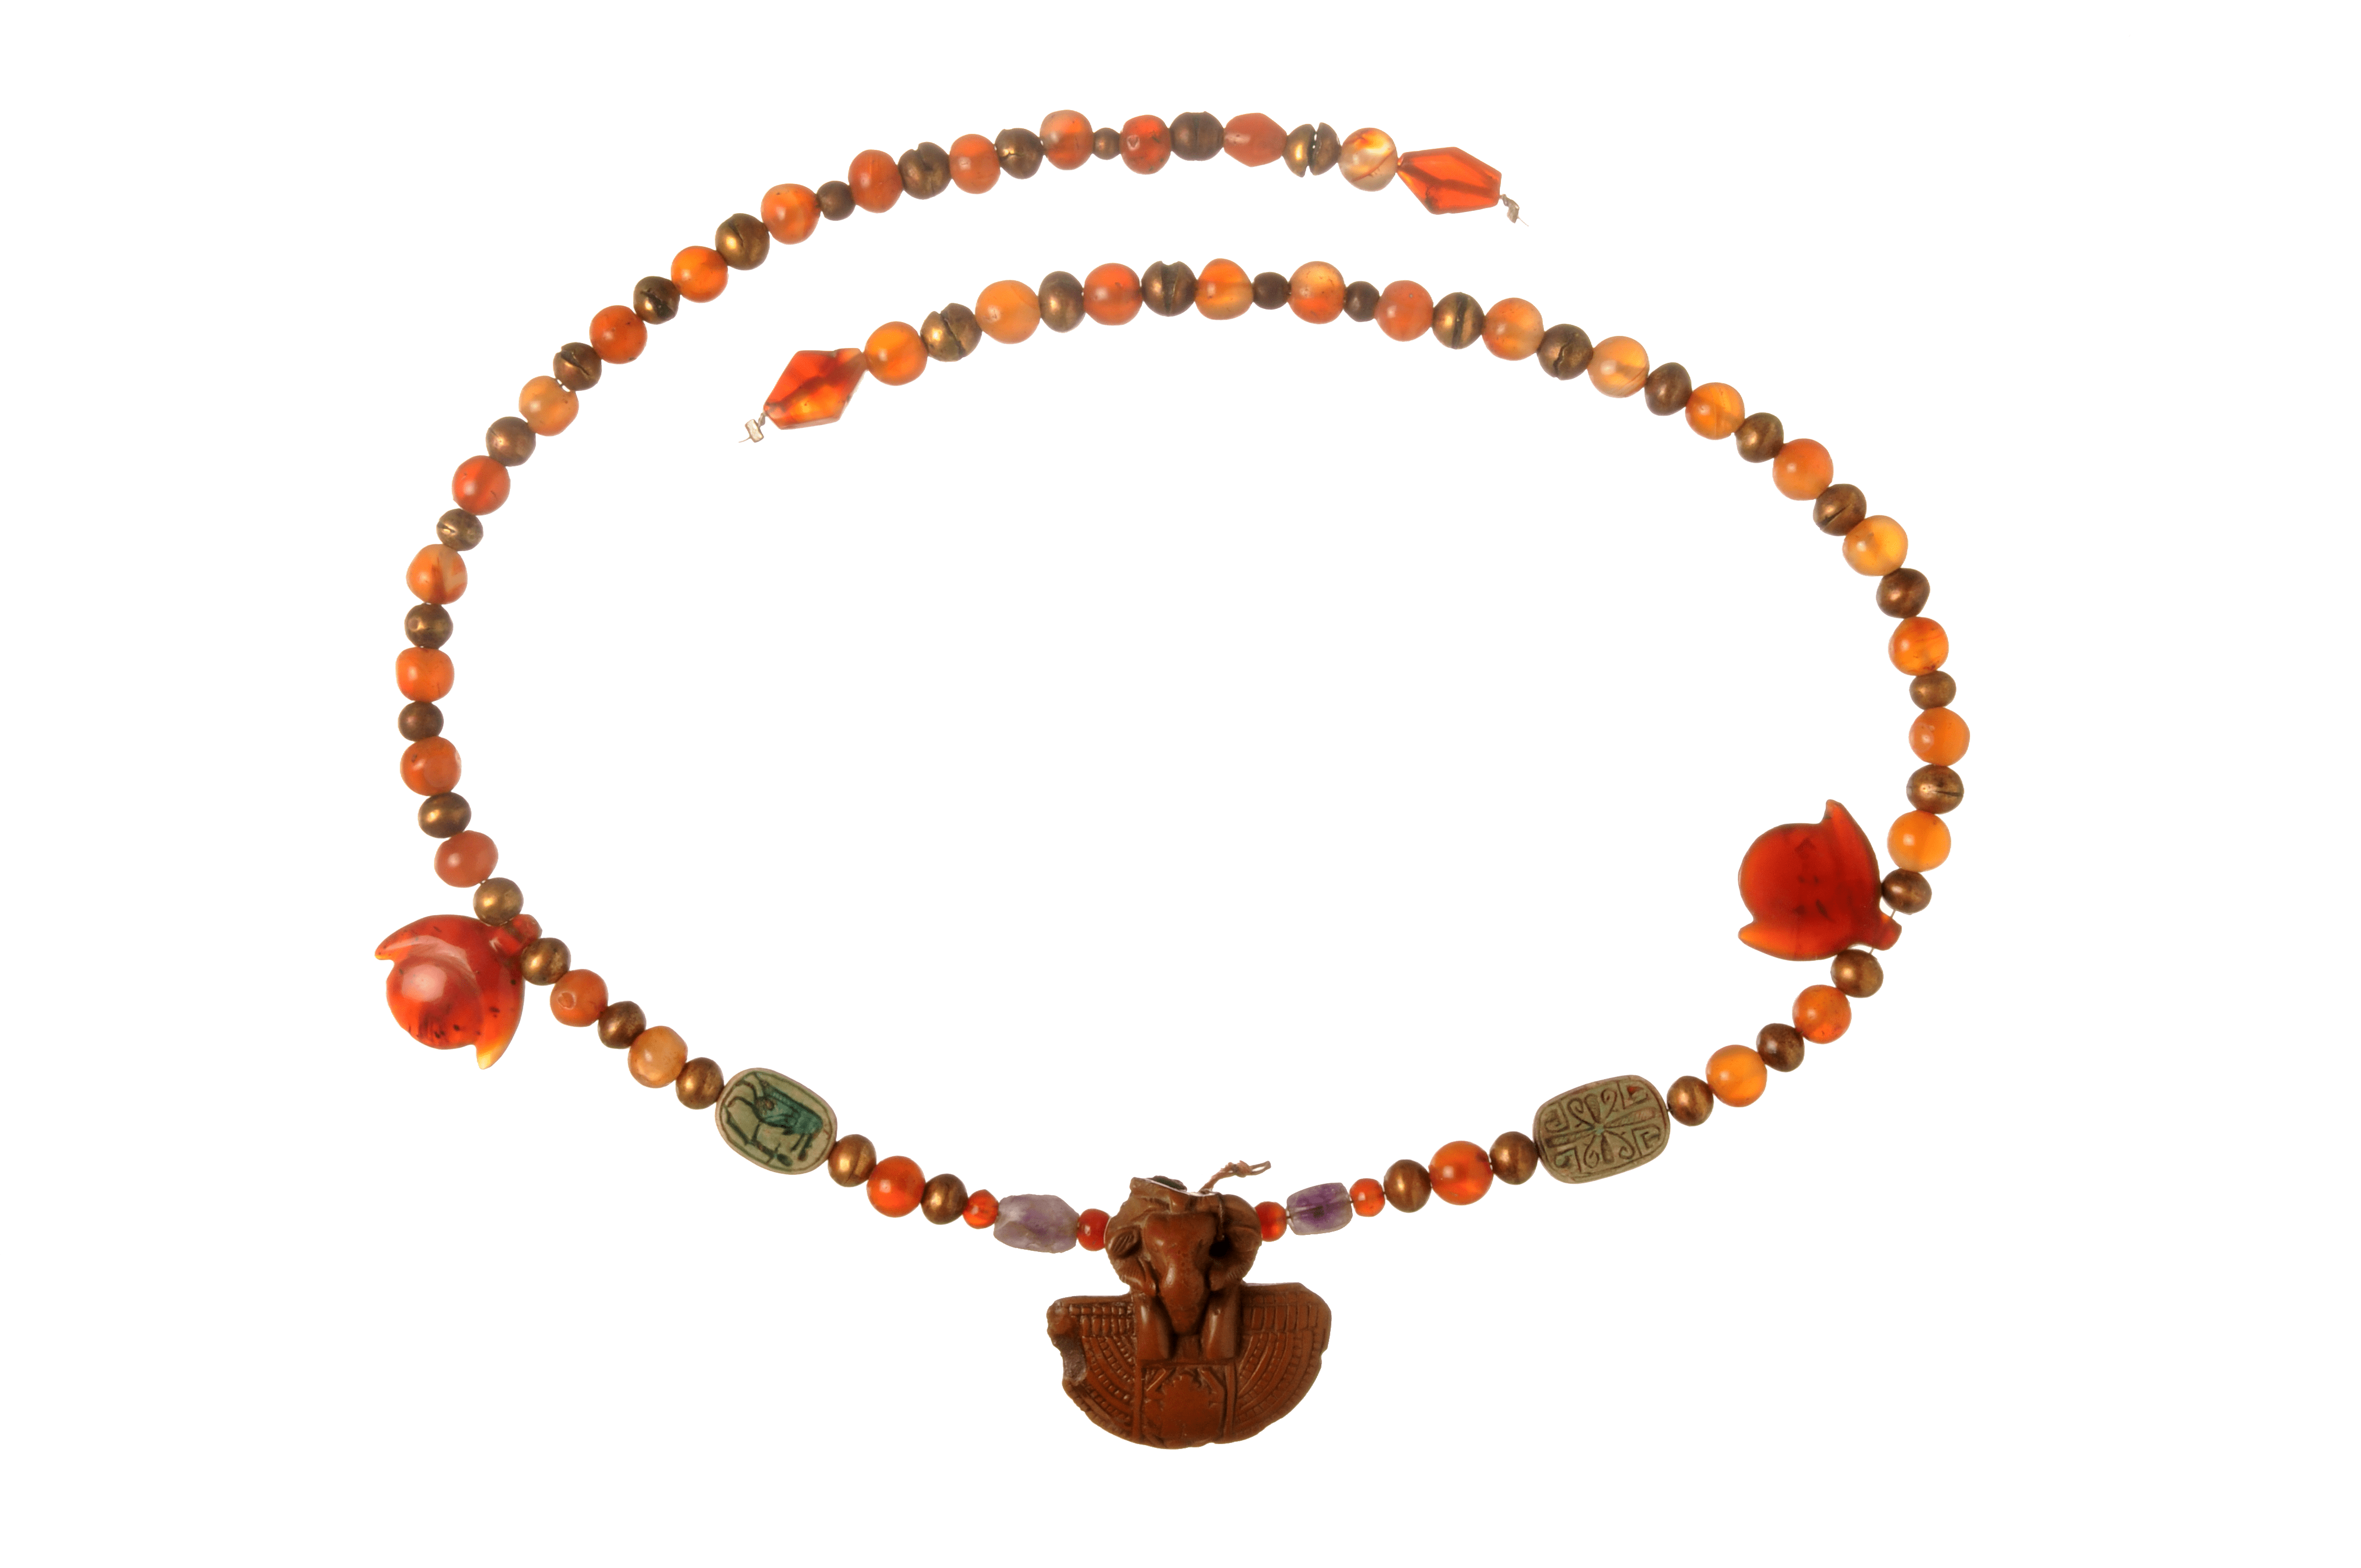 Beaded necklace with a rams head pendant